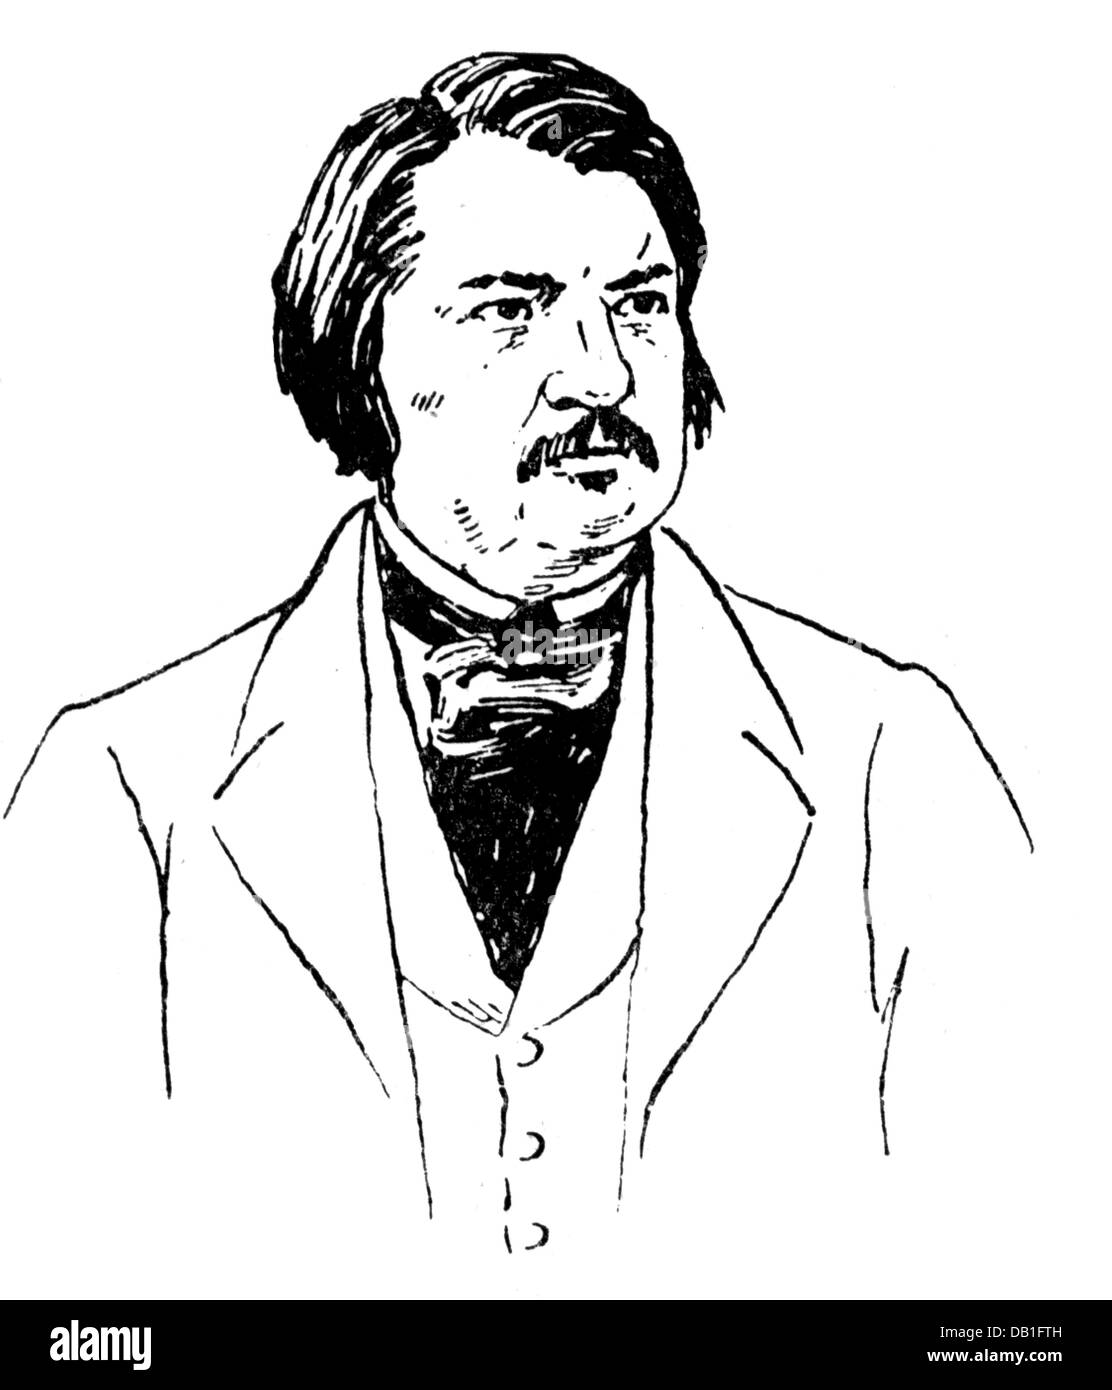 Balzac, Honore de, 20.5.1799 - 18.8.1850, French author / writer, portrait, after lithograph, drawing, 20th century, Stock Photo